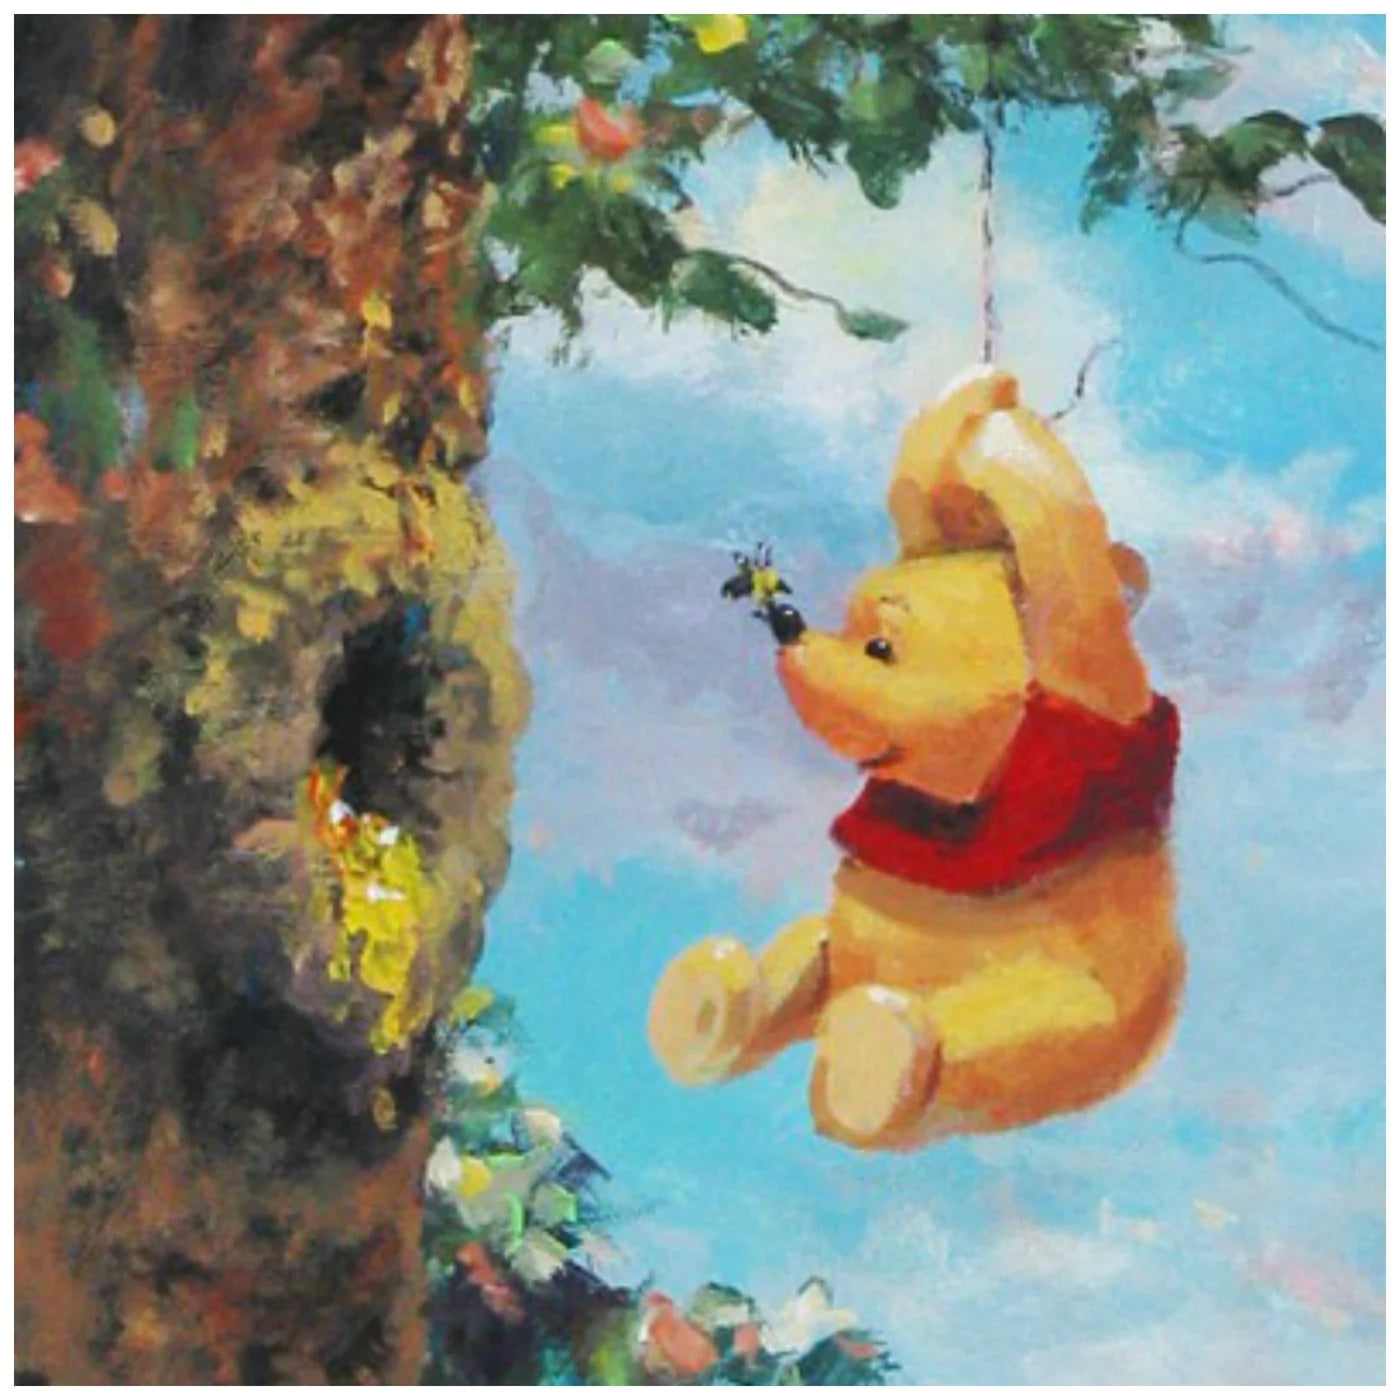 James Coleman Disney "Up in the Air" Limited Edition Canvas Giclee